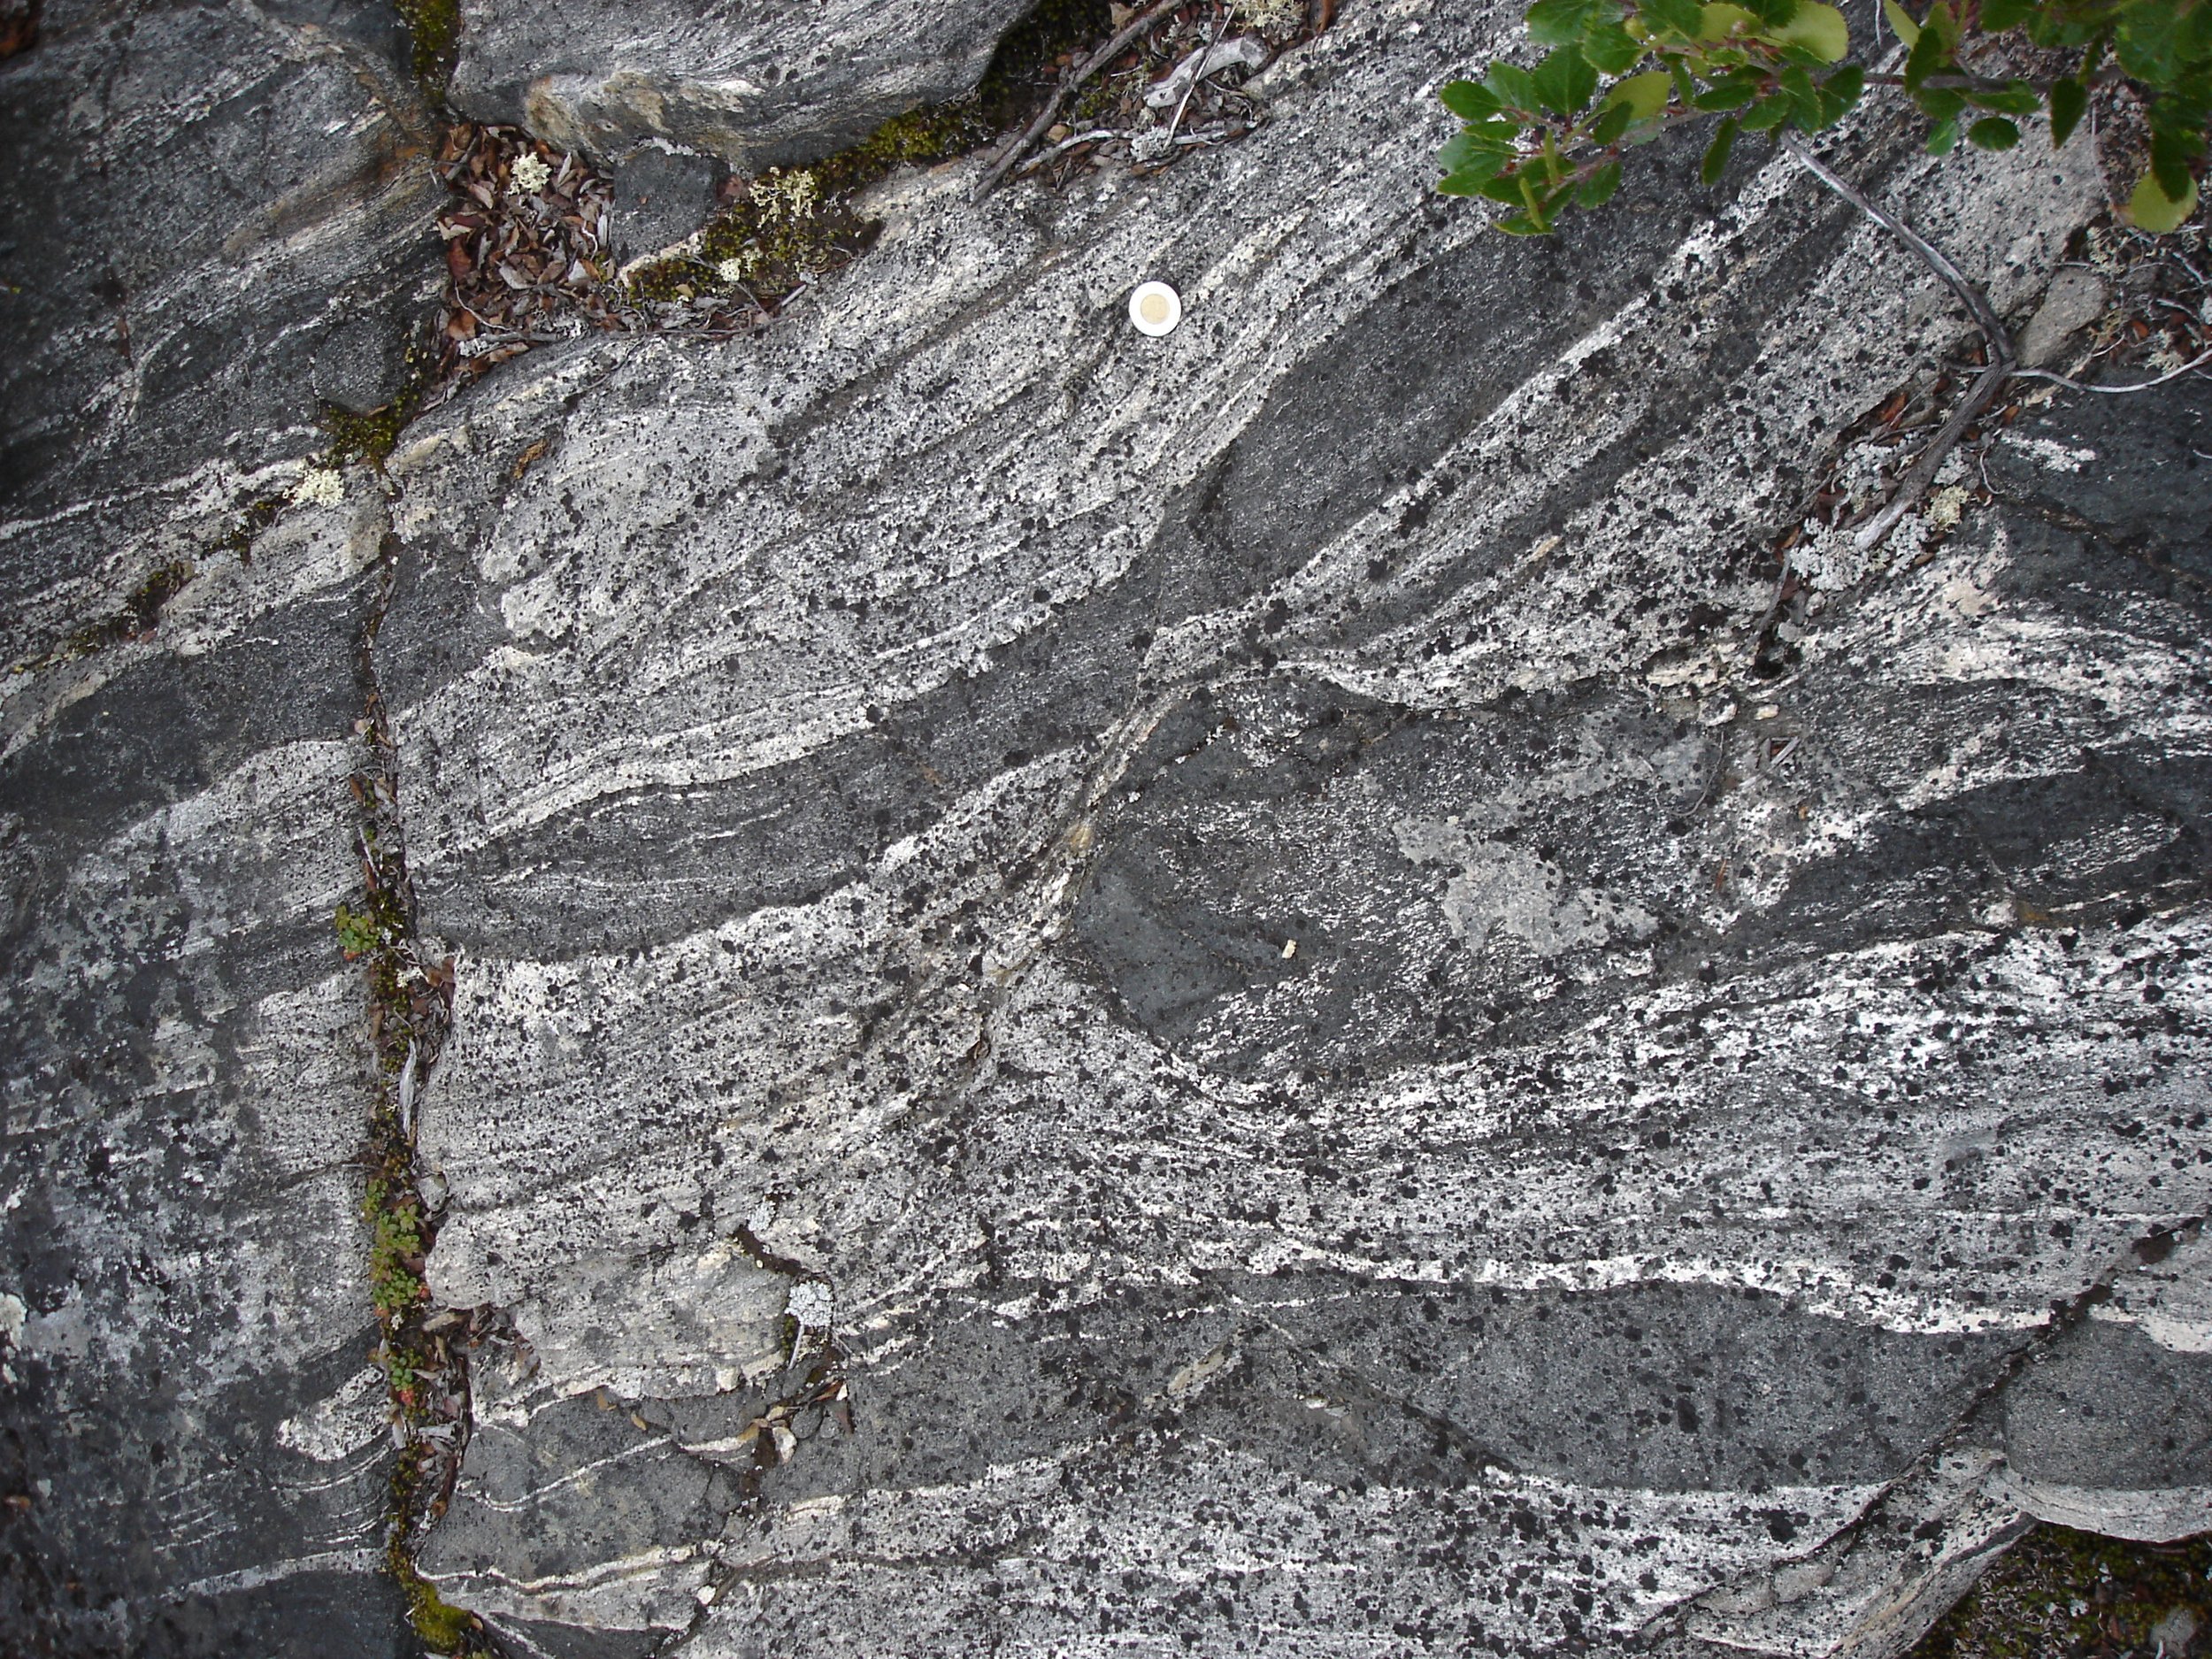 Banded Gneisses in the Acasta Gneiss Complex